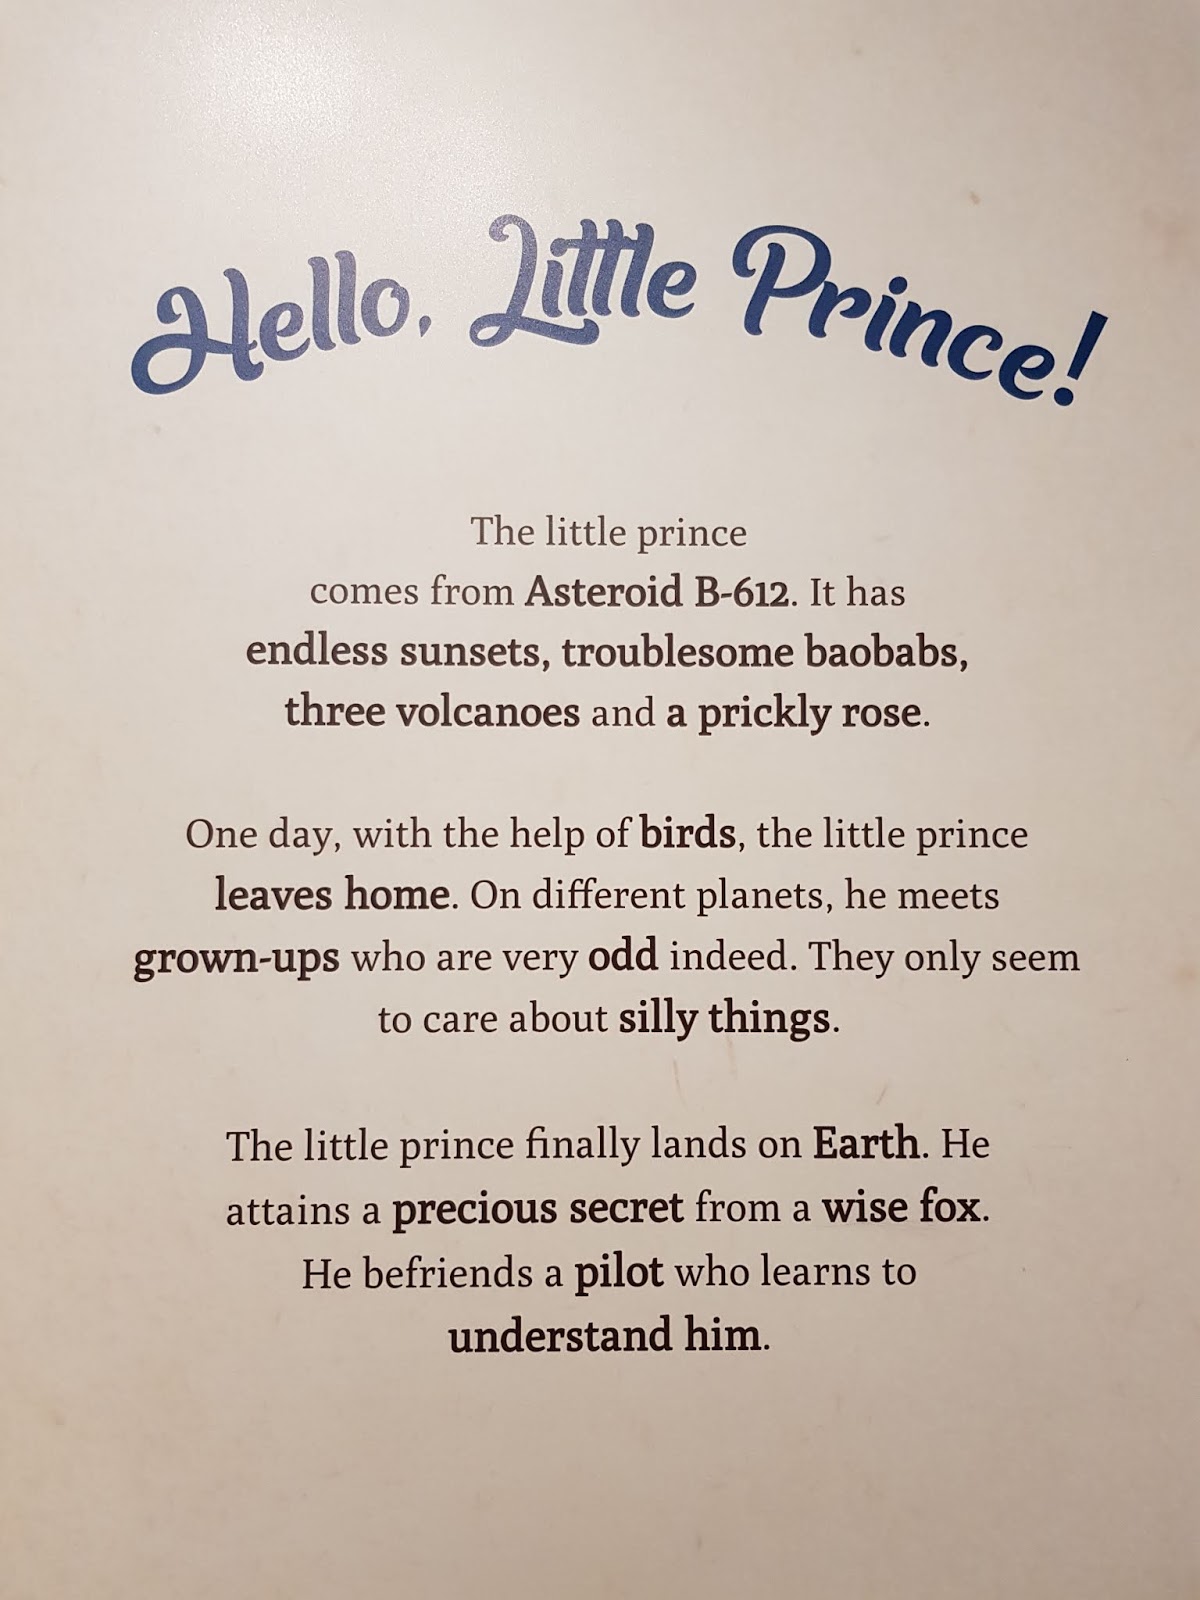 essay on the little prince